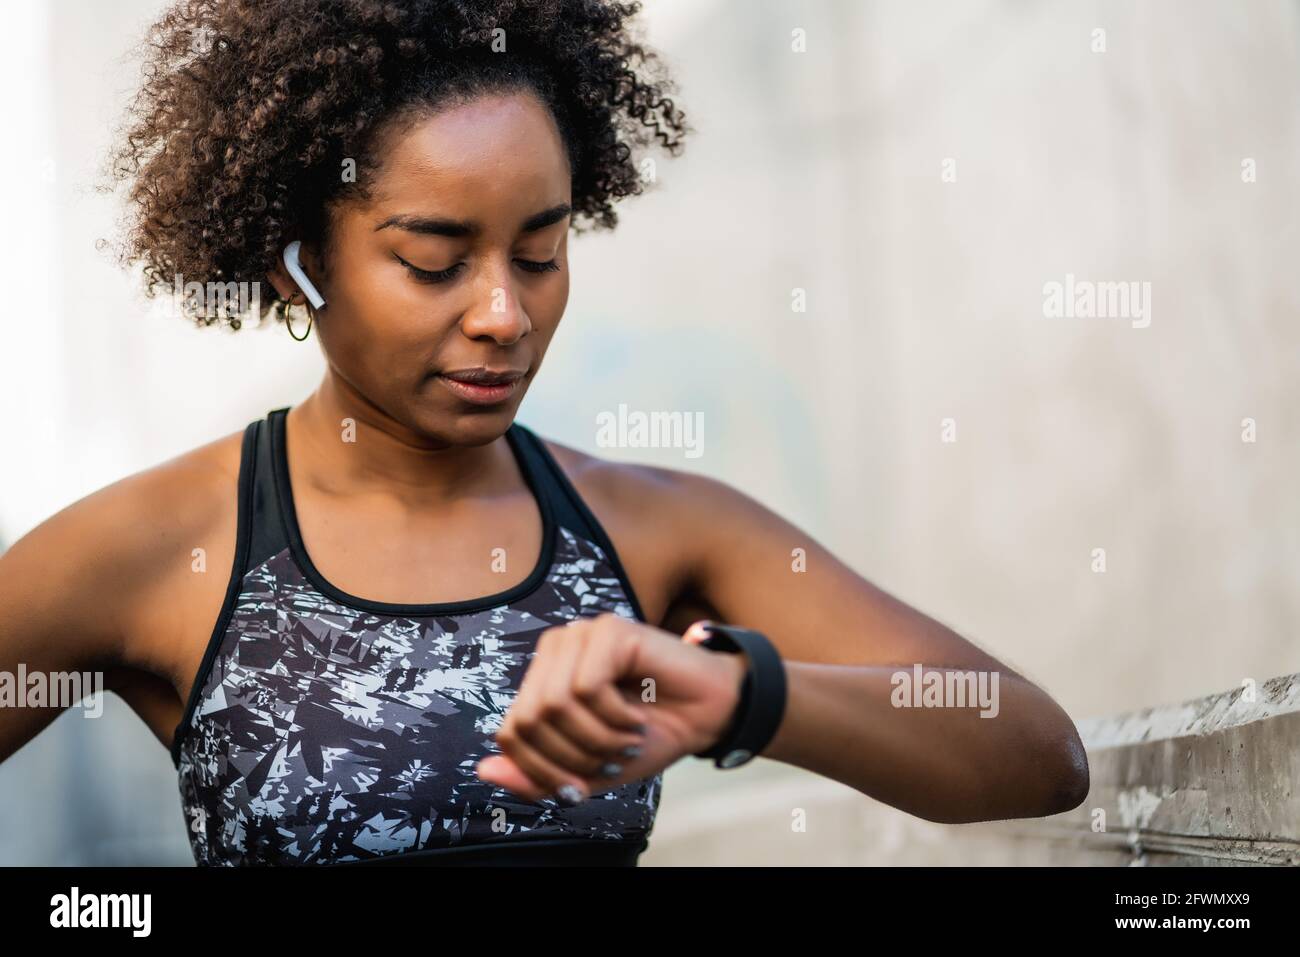 Fitness woman checking time on smart watch. Stock Photo